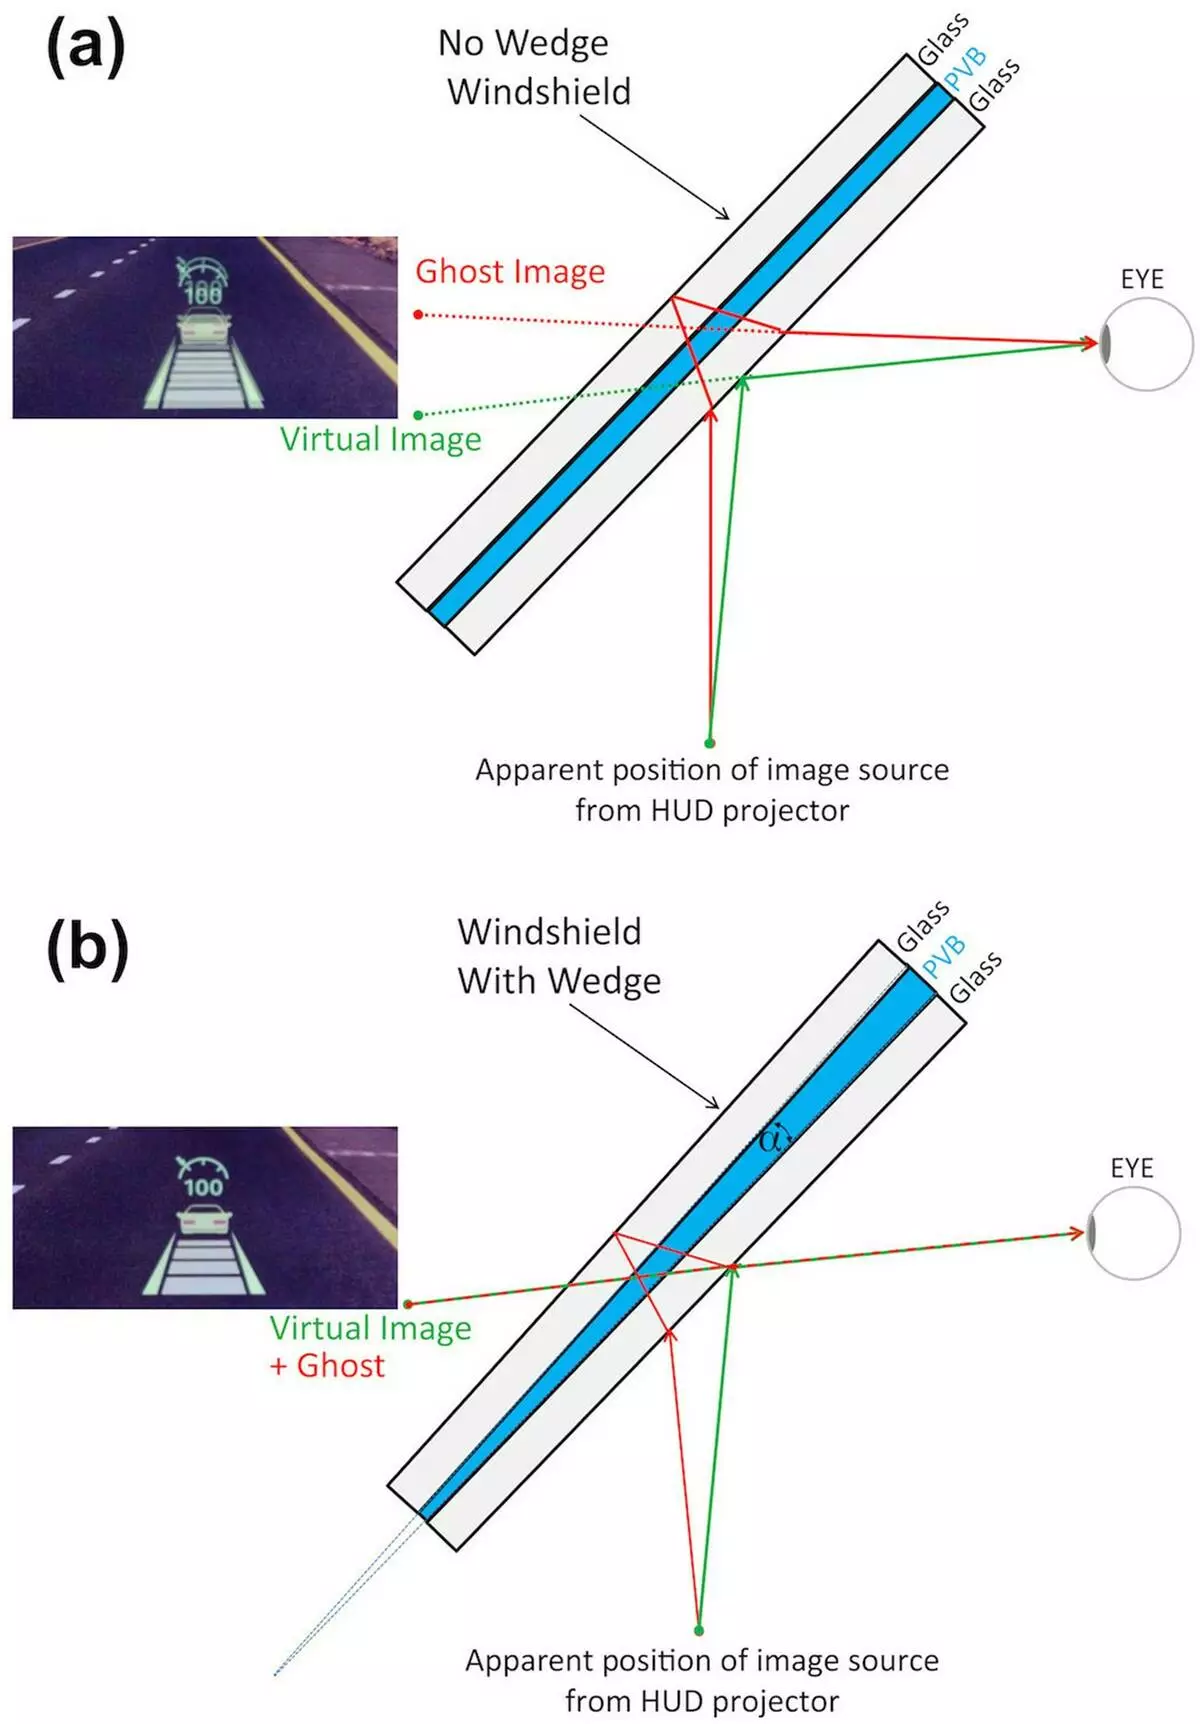 Windshield made from two glass layers and PVB without tapering (a) causes a ghosting effect. When the layers are tapered (b), preventing ghosting or double-image effects.